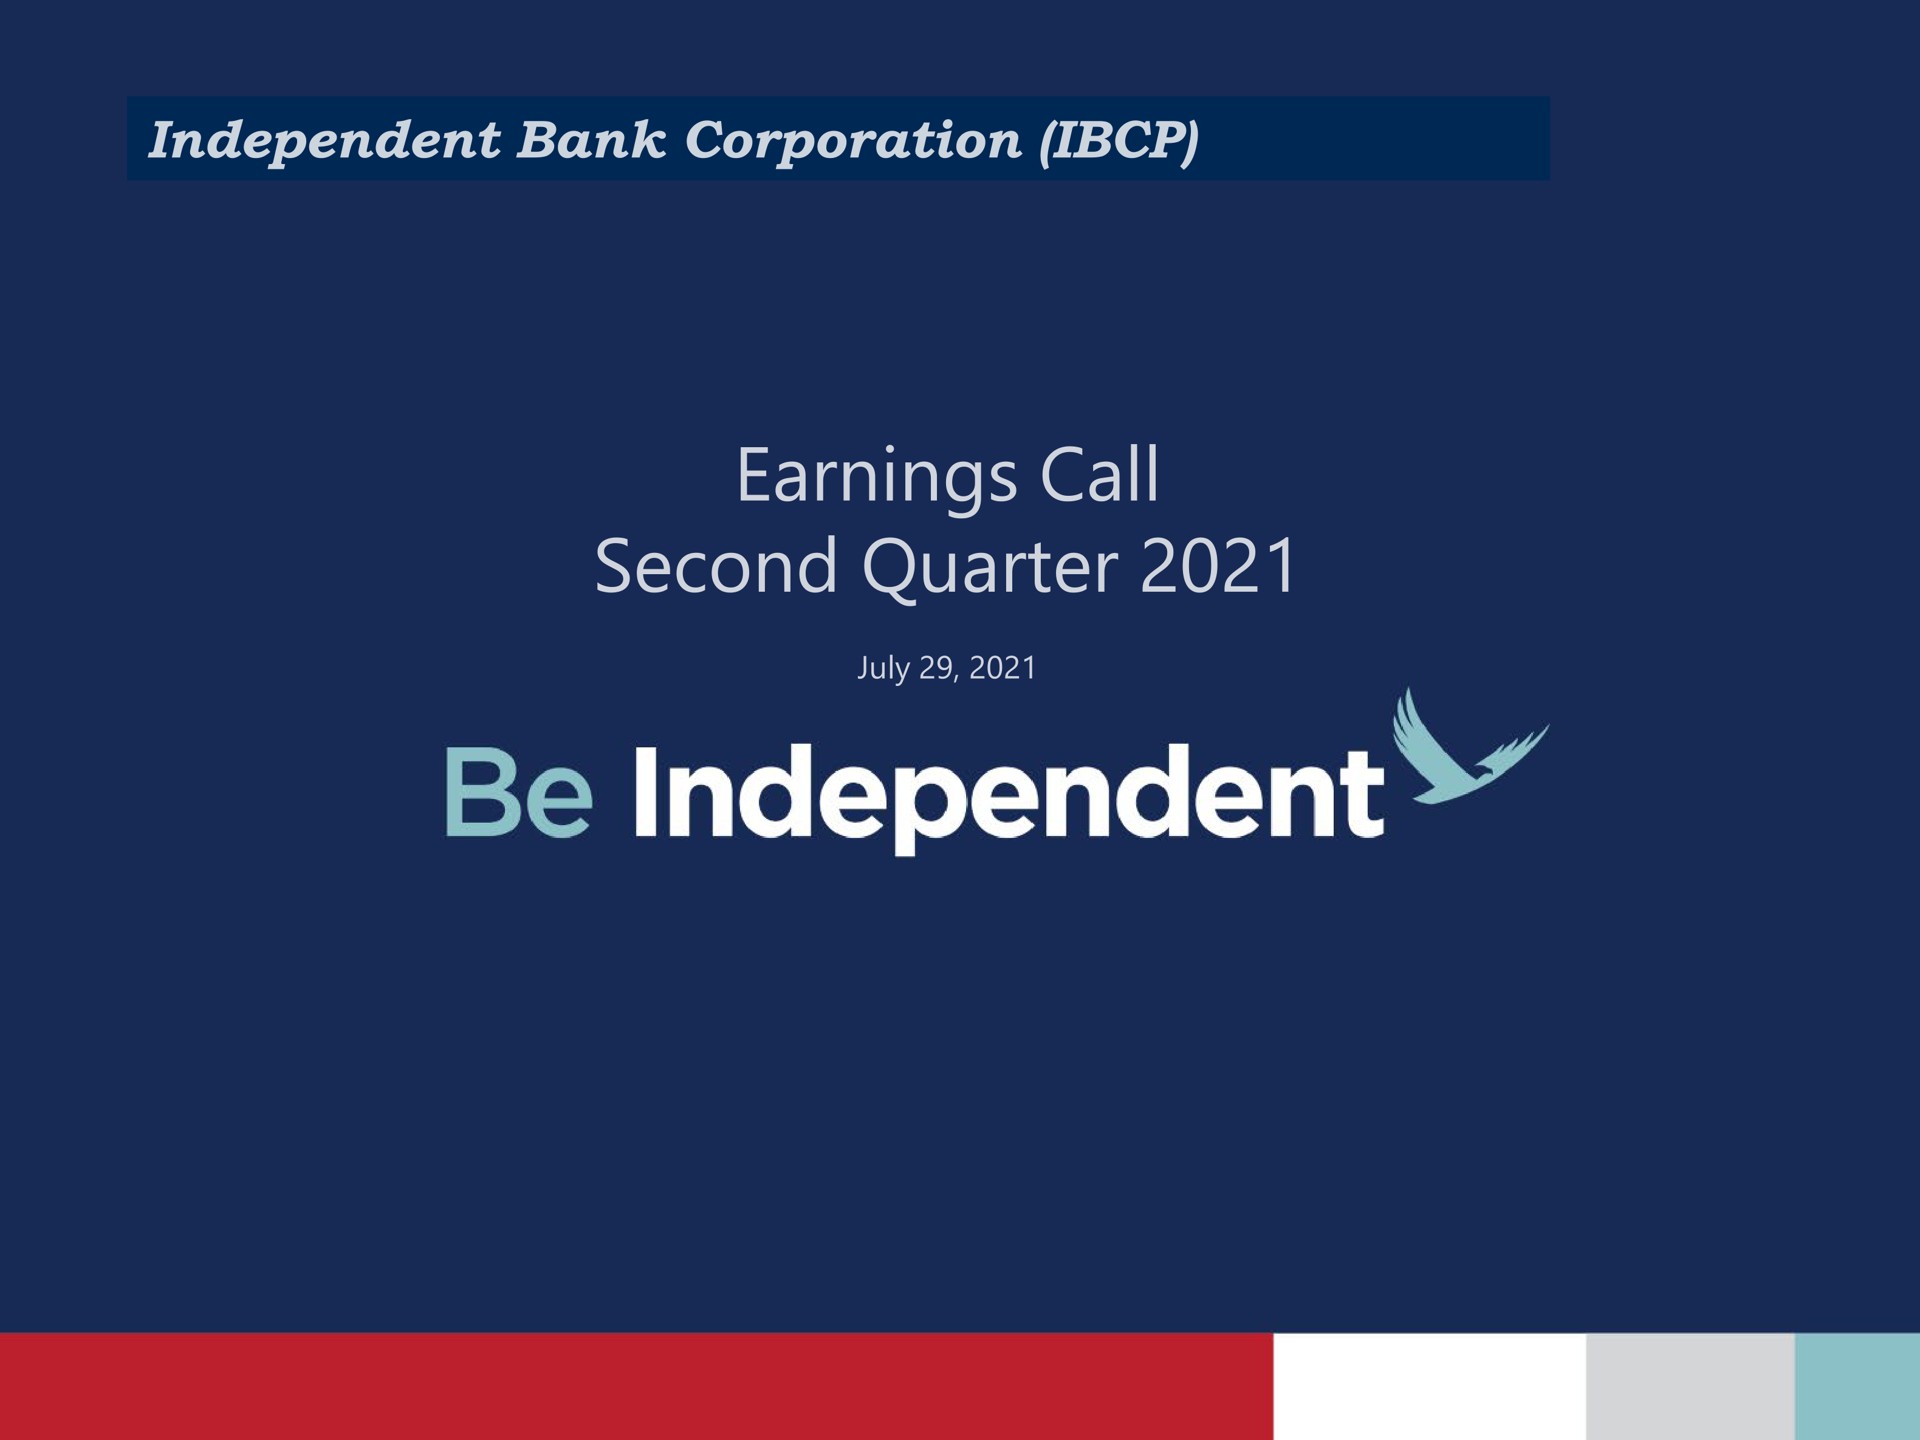 independent bank corporation earnings call second quarter be independent | Independent Bank Corp